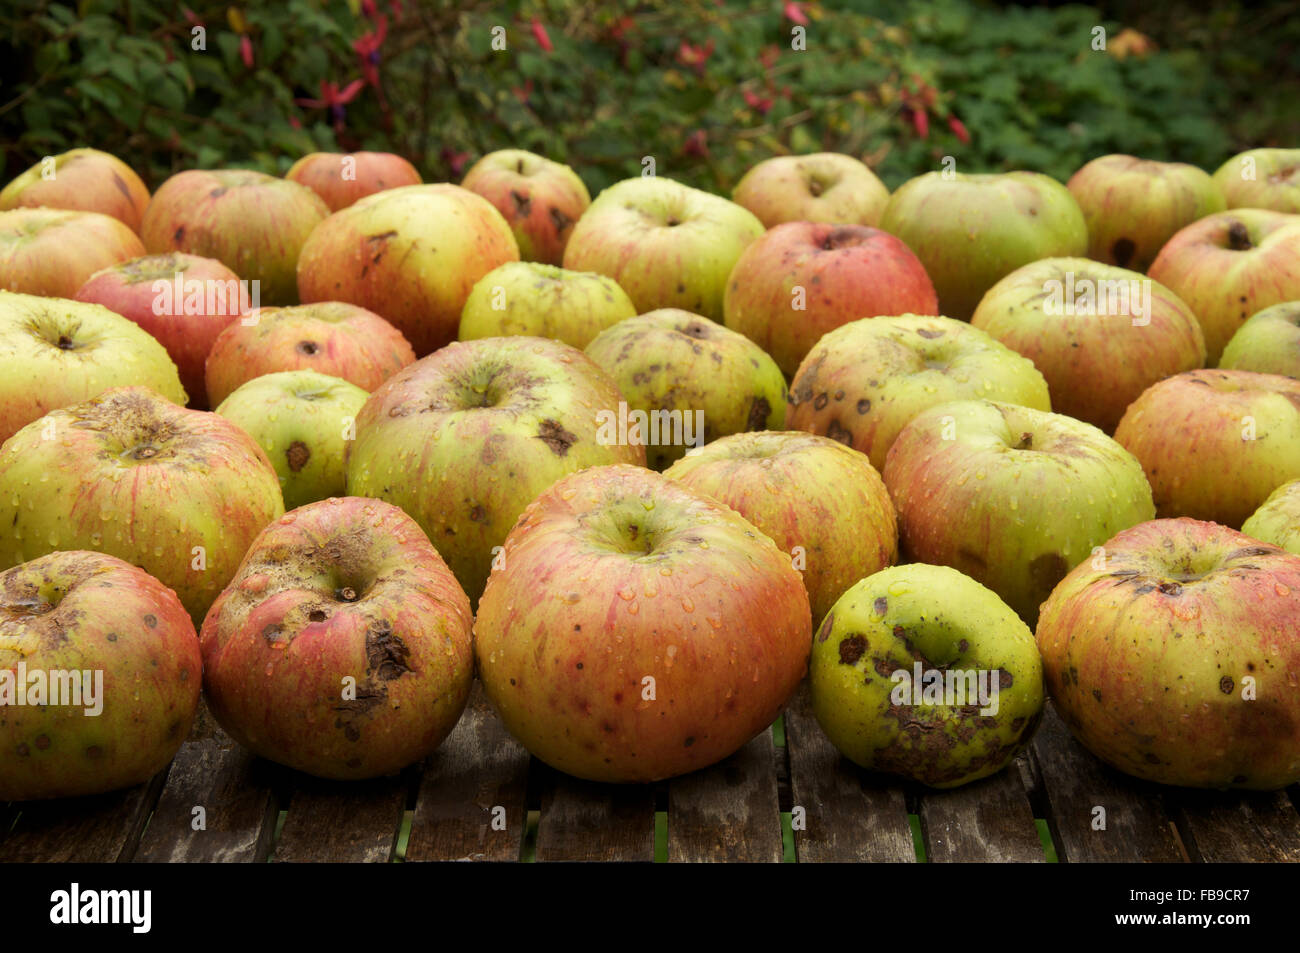 Organic cooking apples, a larger, tarter tasting cultivar of the fruit tree “Malus domestica, on a wooden garden table. England, United Kingdom. Stock Photo